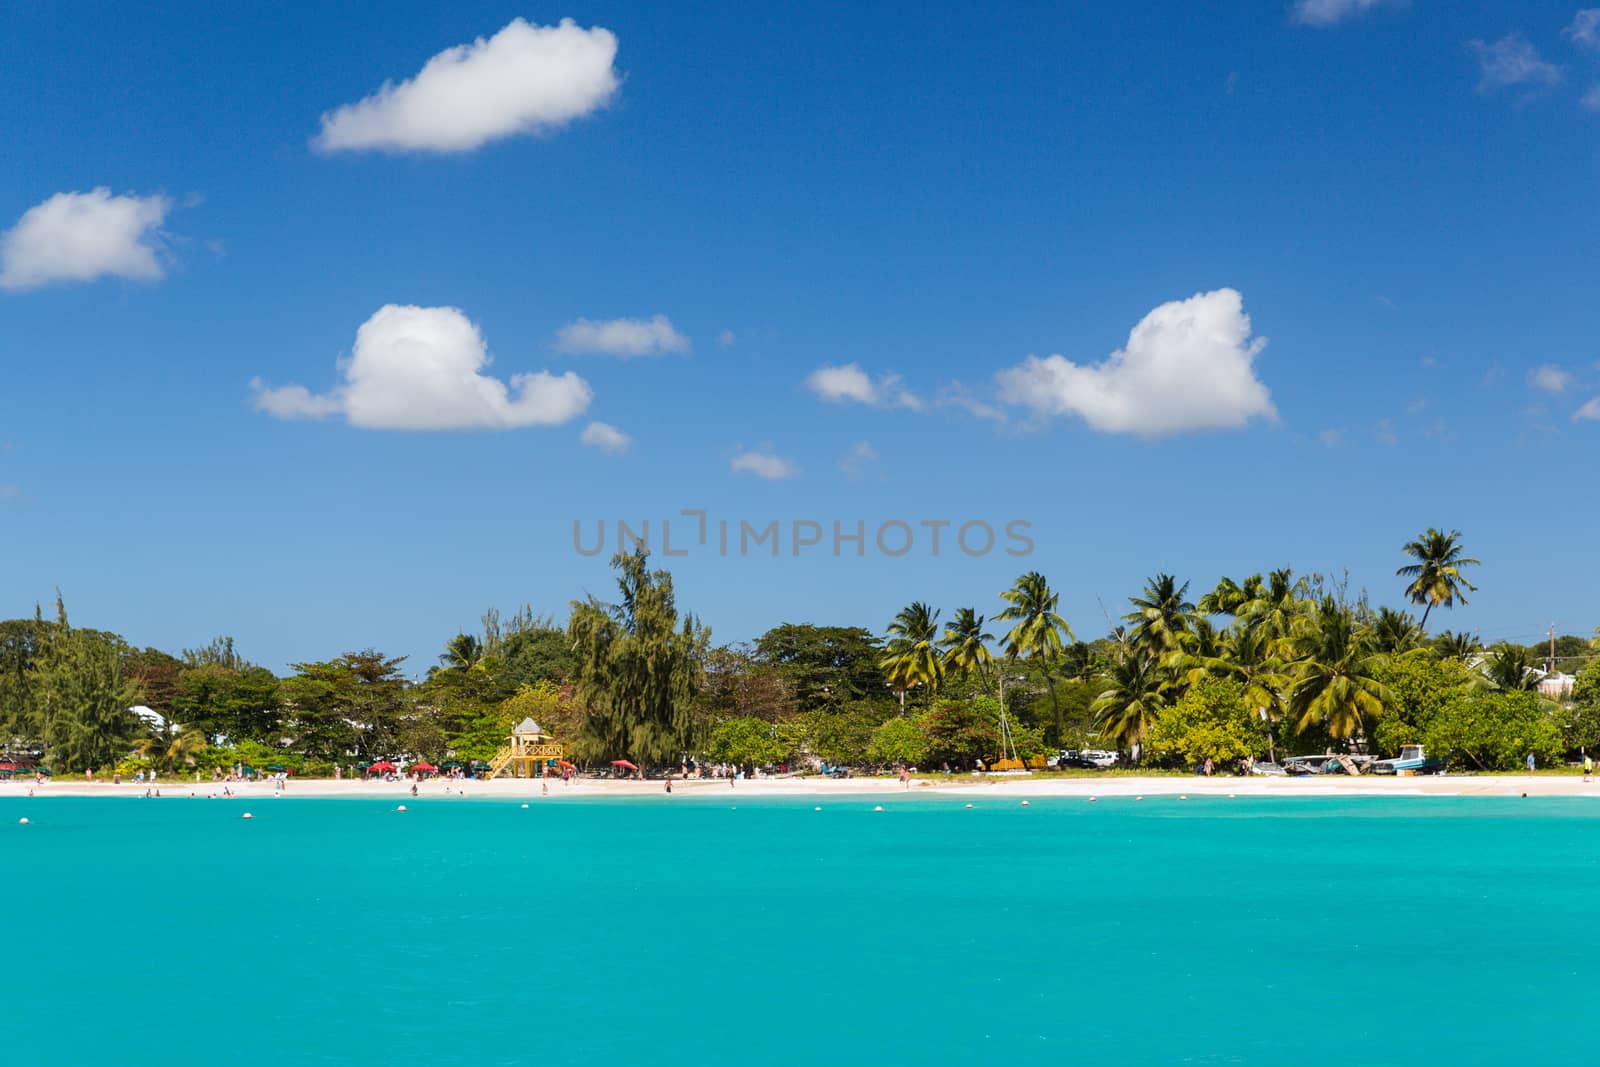 View of the Beach from a Catamaran in Carlisle Bay Barbados by chrisukphoto